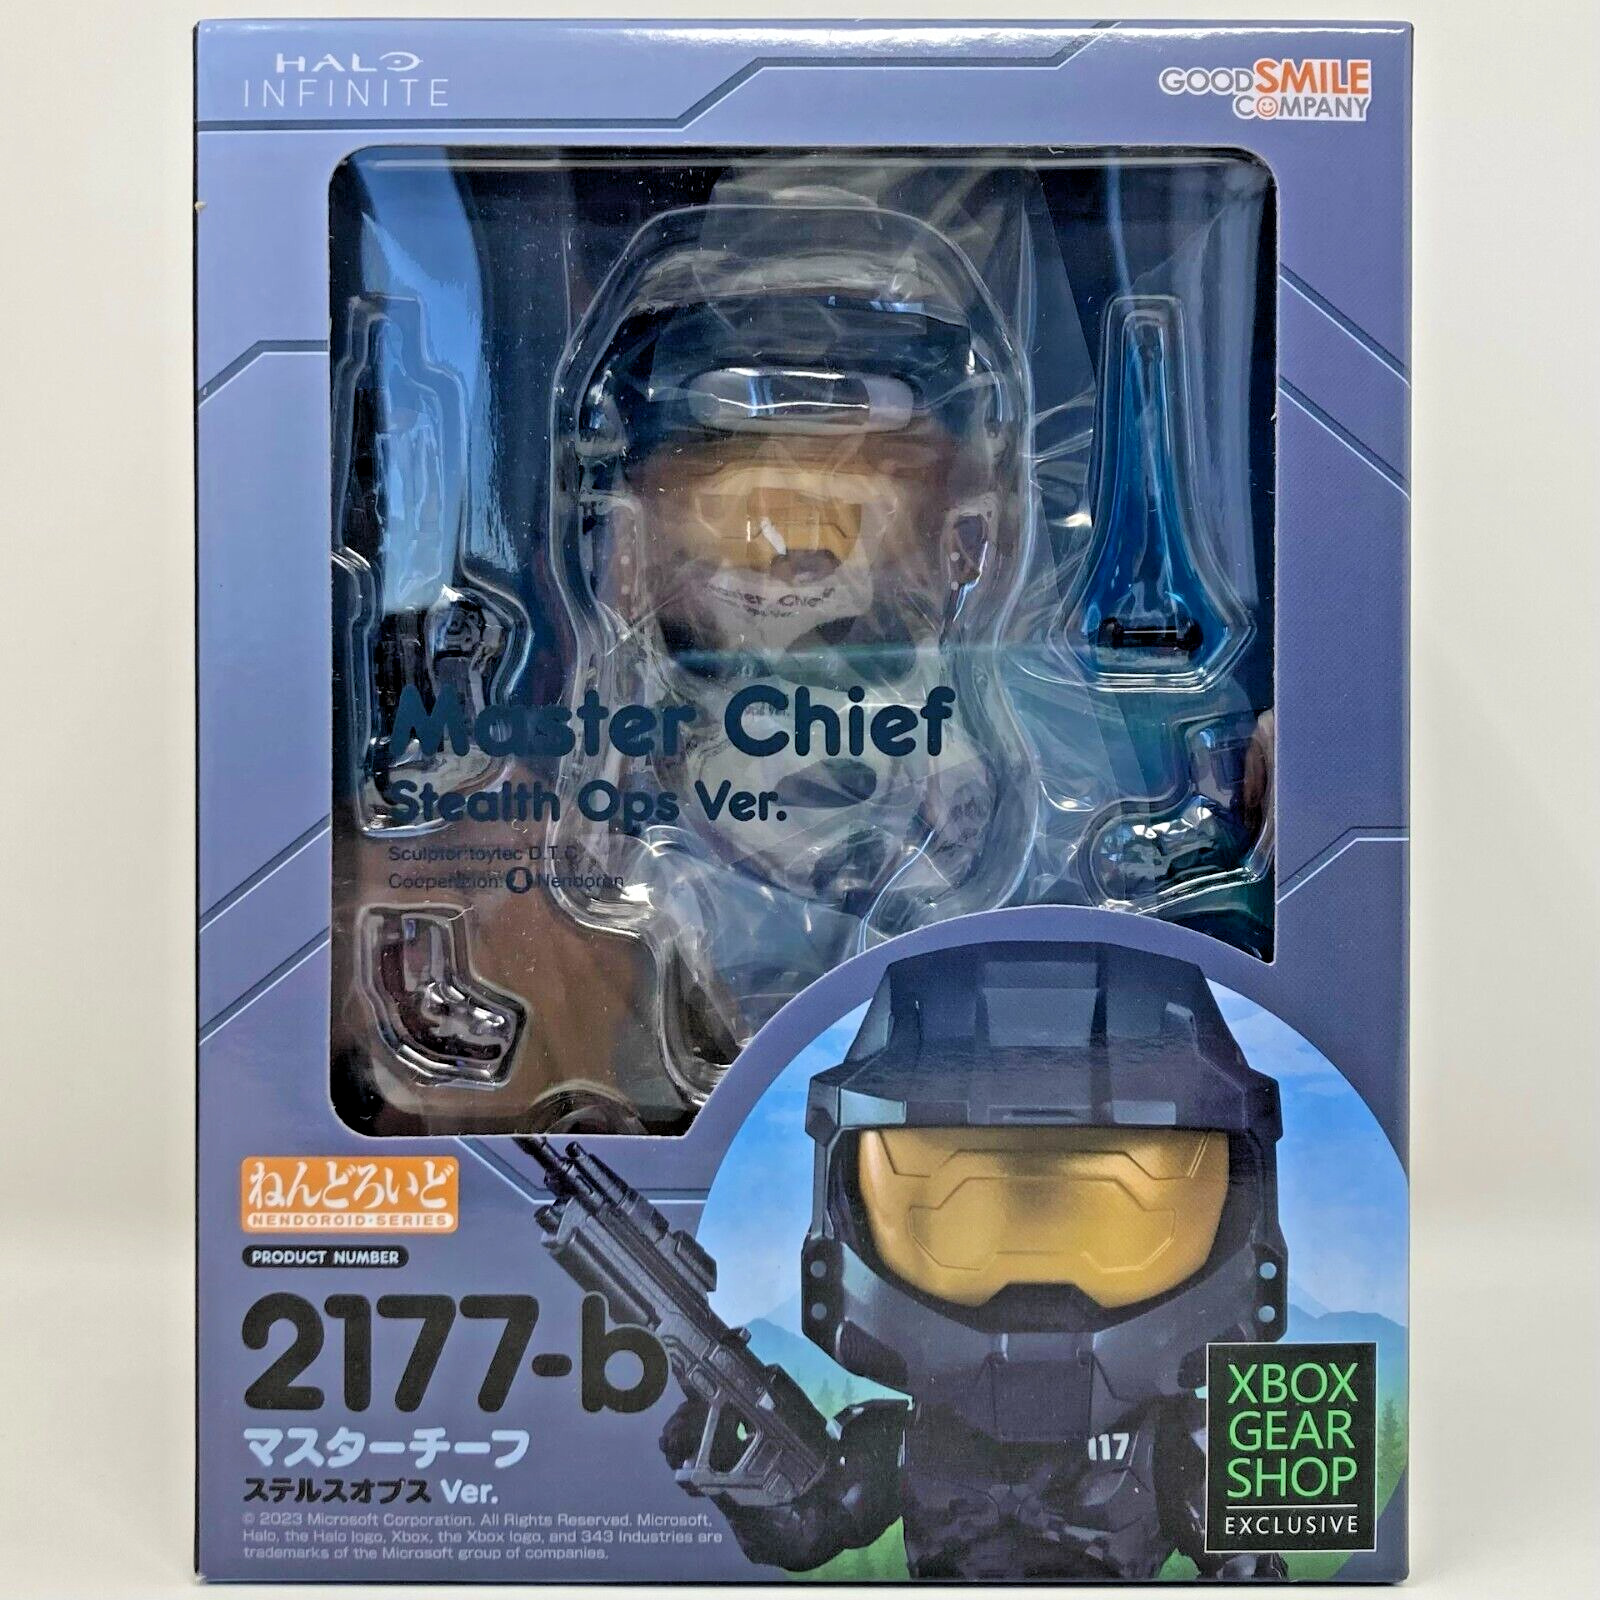 Nendoroid Master Chief Halo Stealth Ops Variant No. 2177-b Exclusive Black